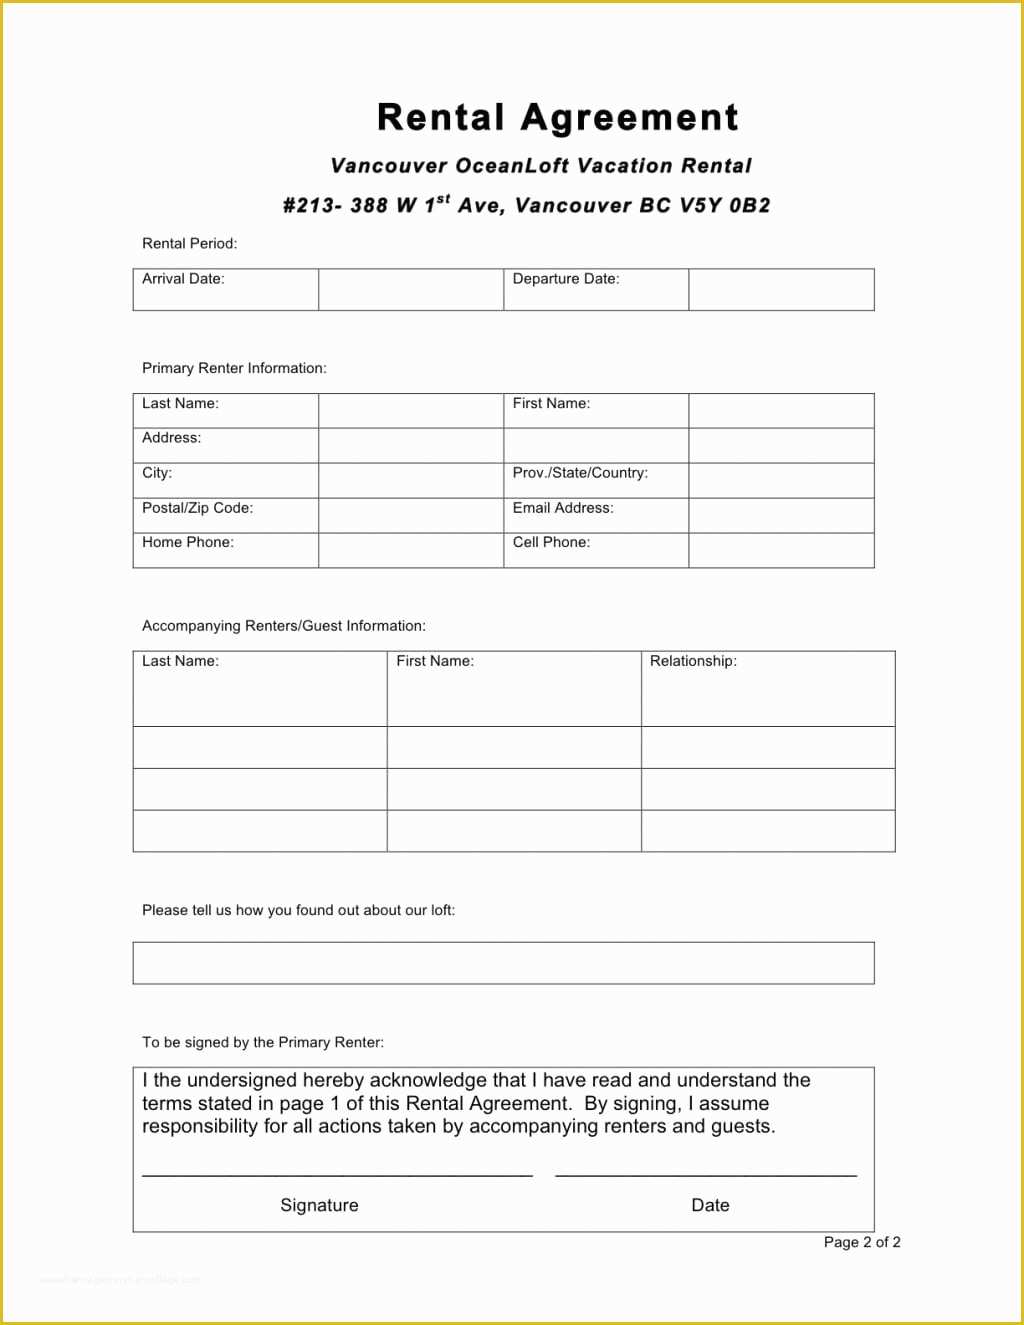 Free Condo Rental Agreement Template Of 6 Free Rental Agreement Templates Excel Pdf Formats Of Free Condo Rental Agreement Template 